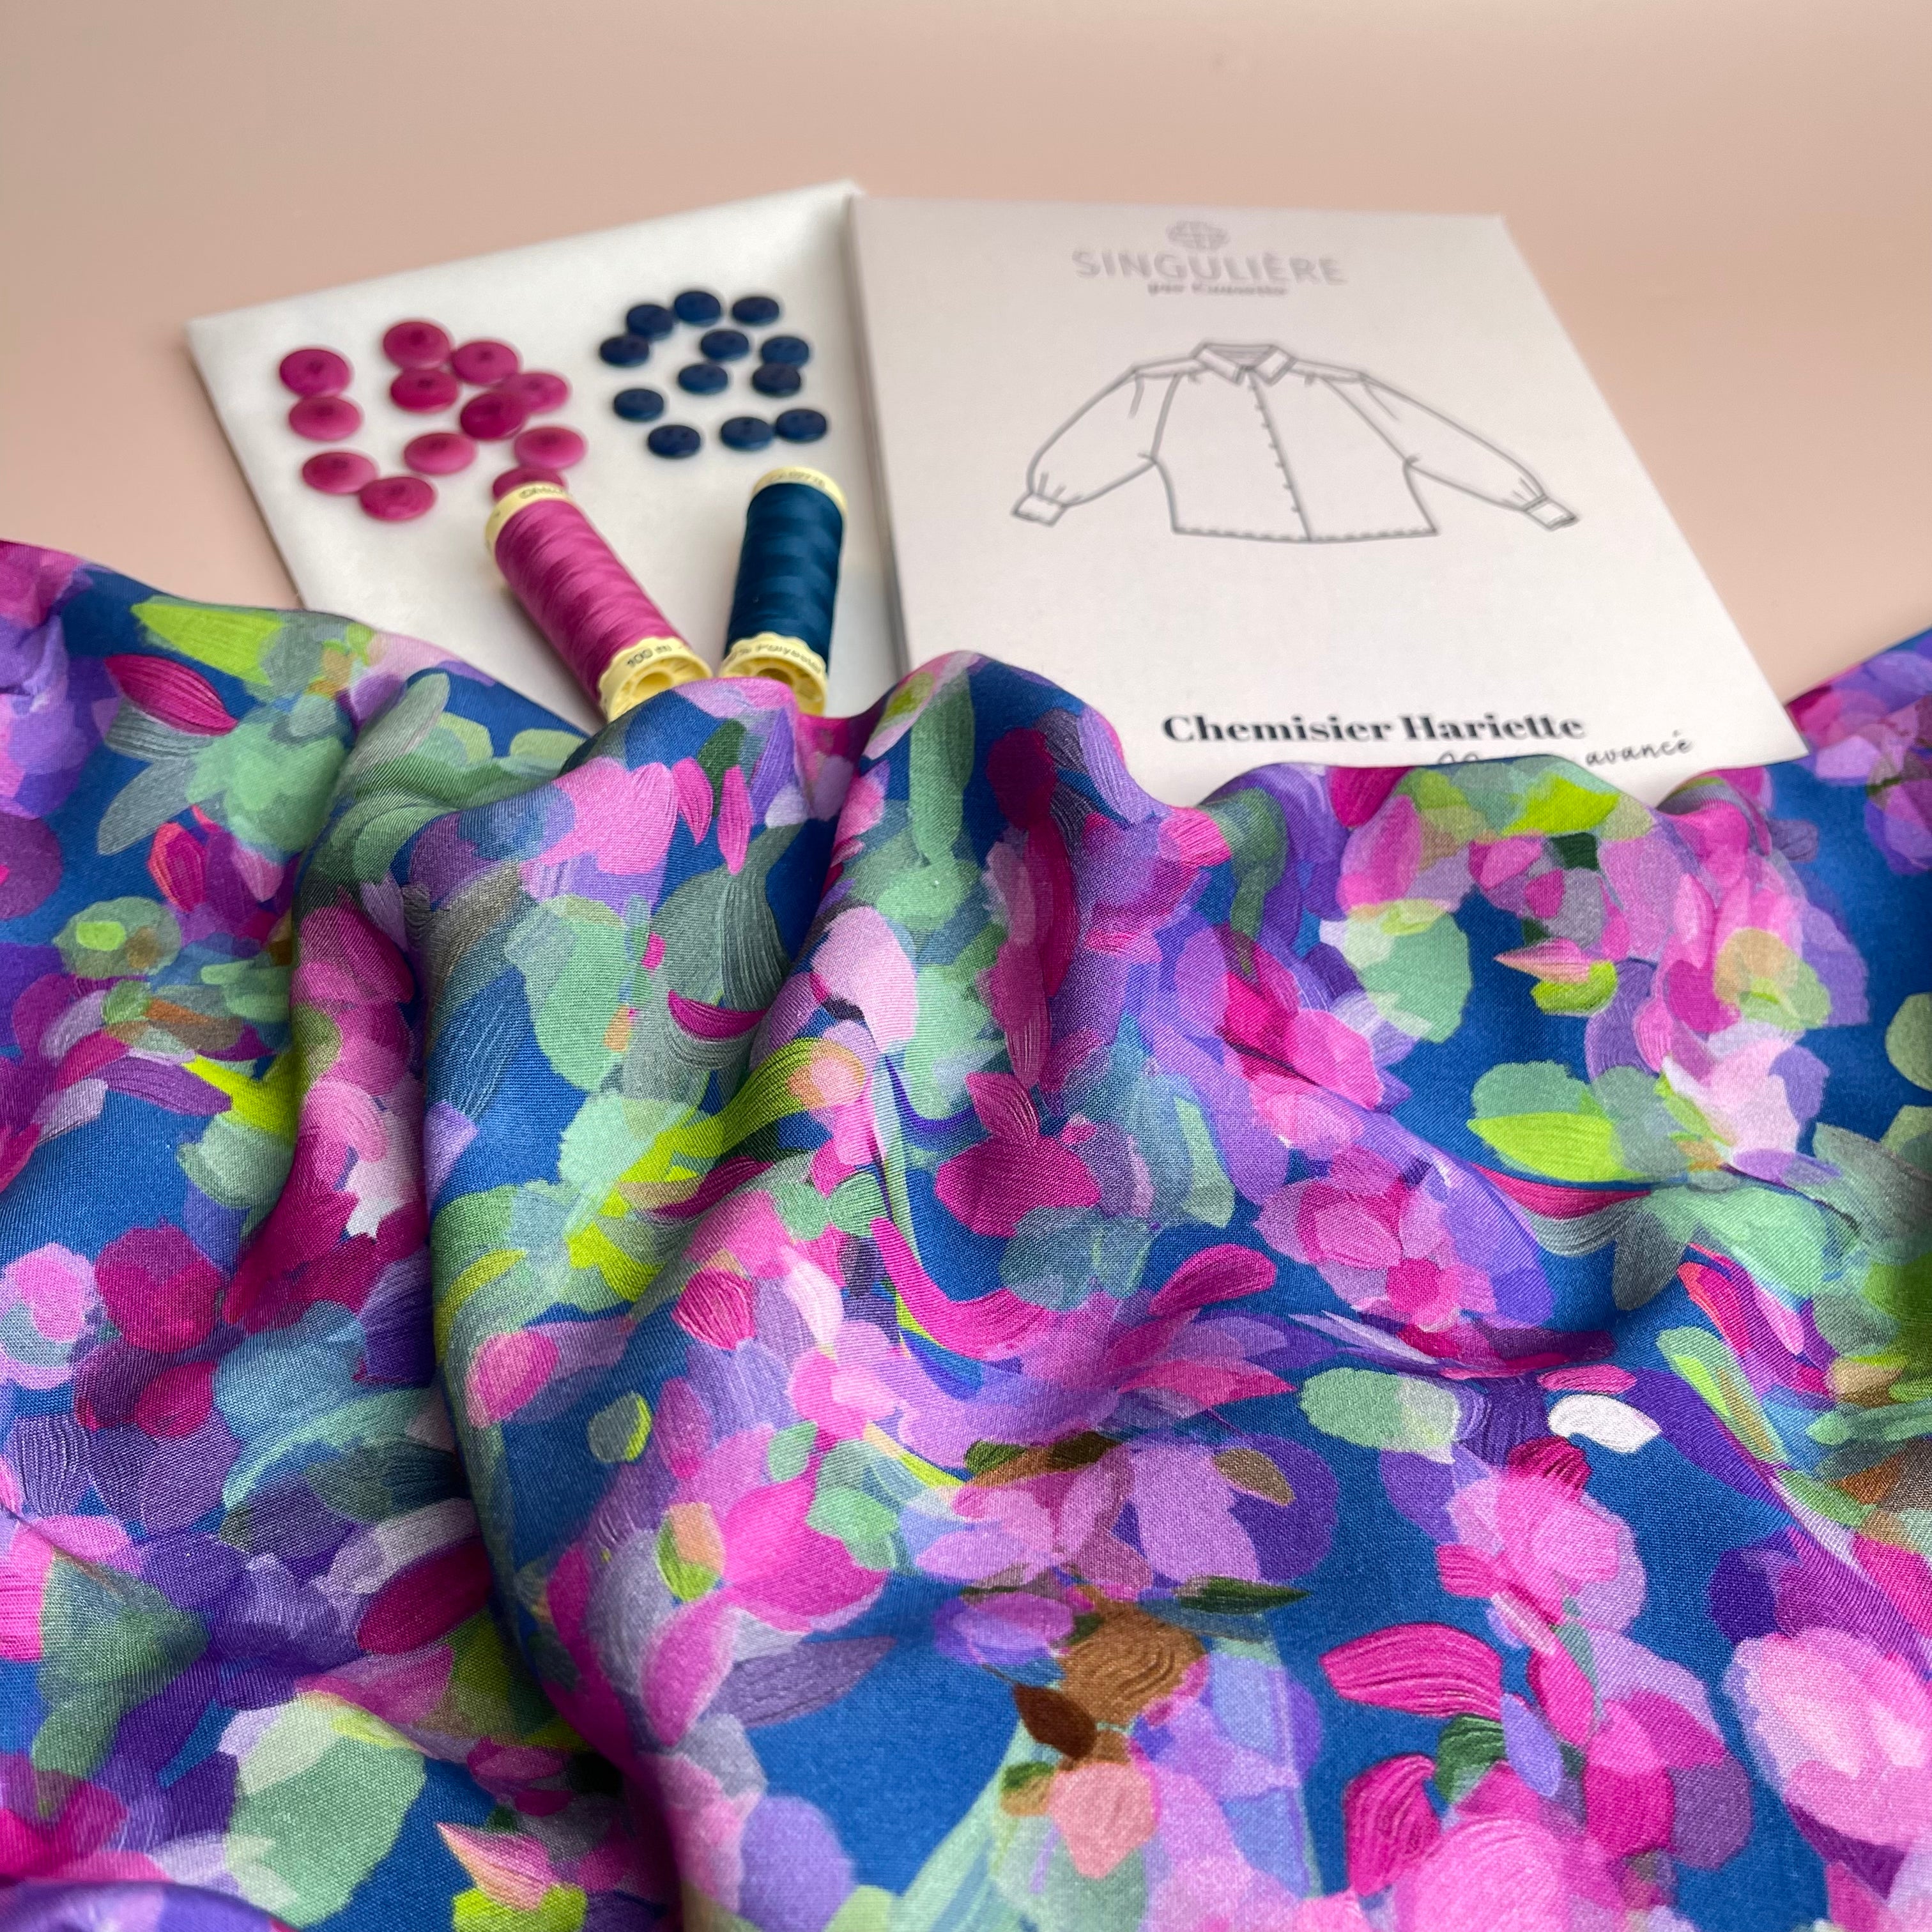 Sewing Kit - Hariette Blouse in Lupine Petals Blue EcoVero Viscose